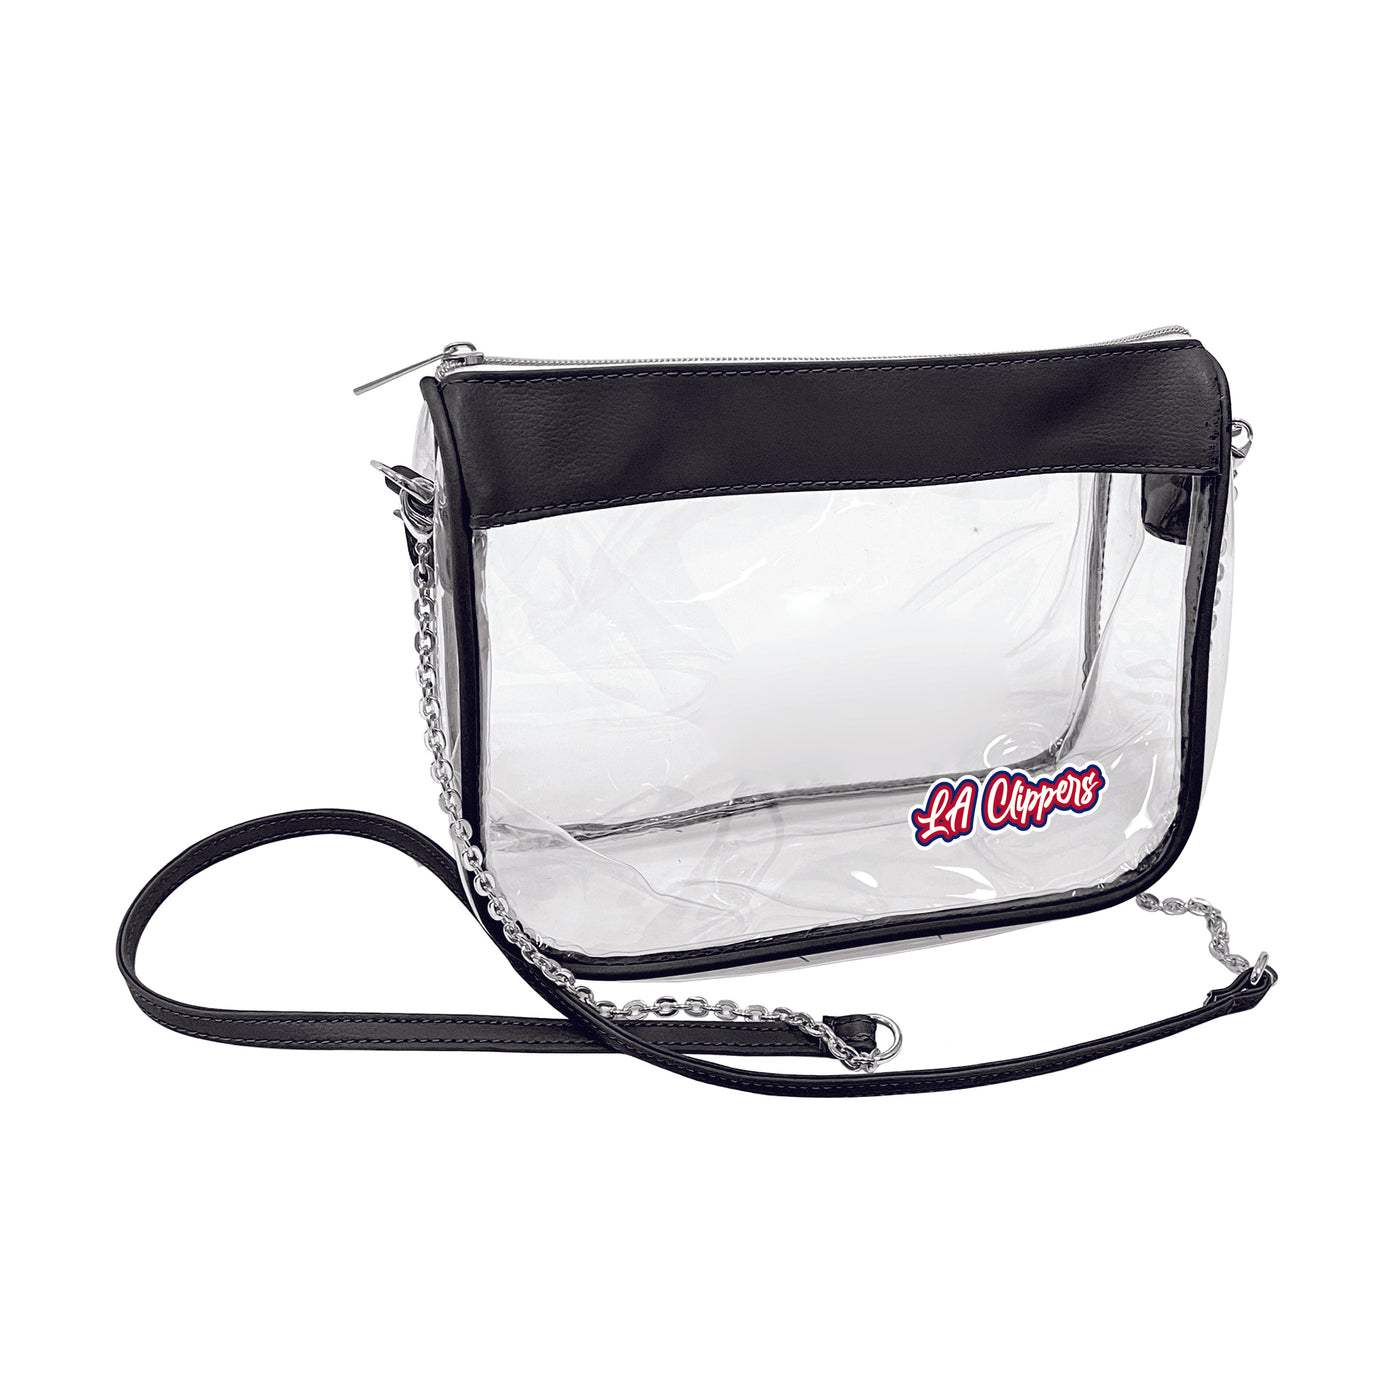 LA Clippers Hype Clear Bag